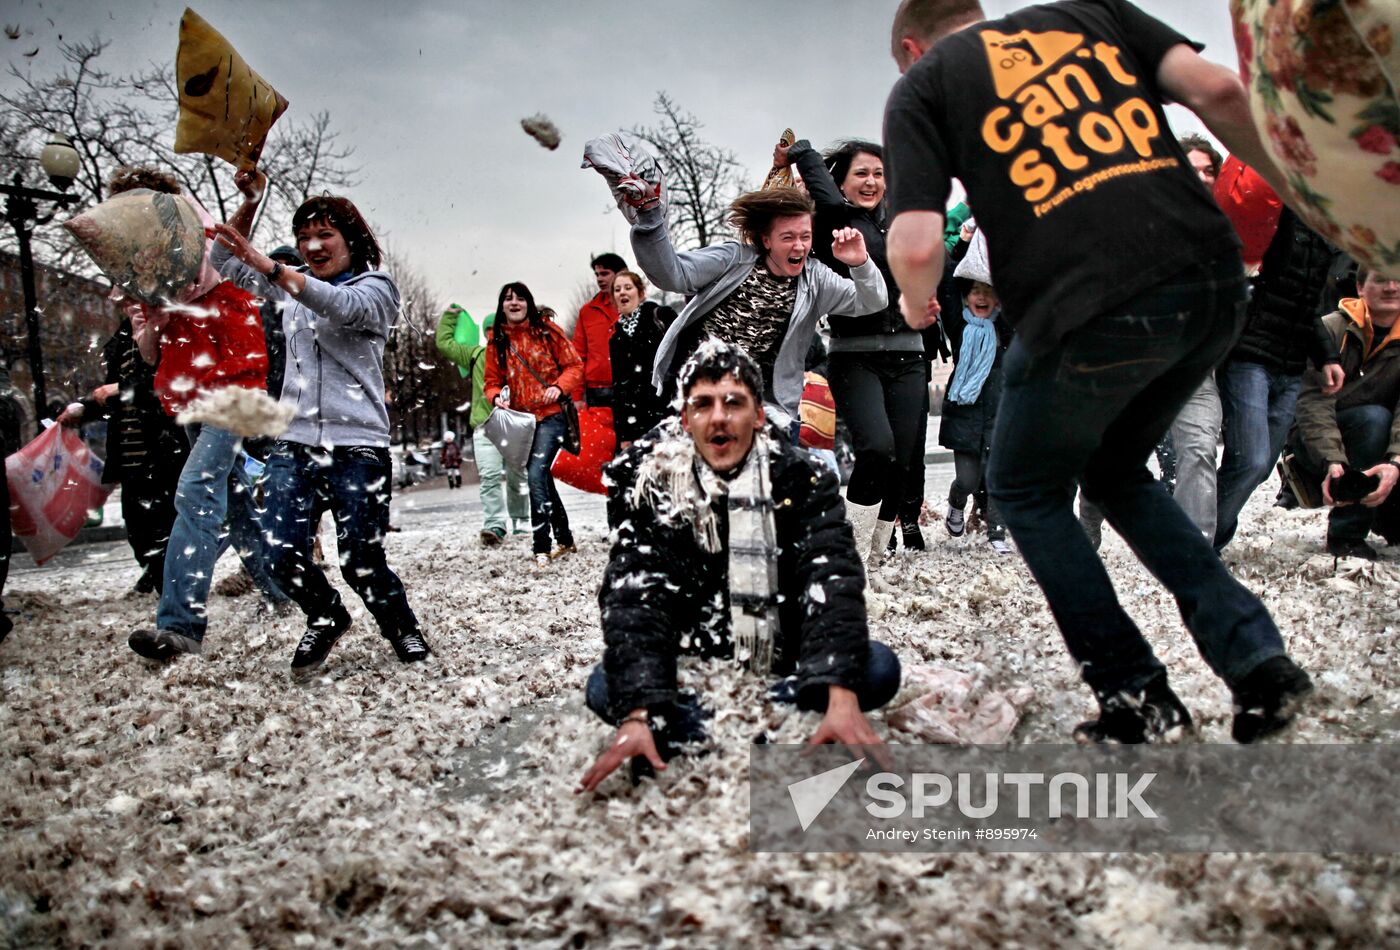 Flash-mob "pillow fight" in Moscow